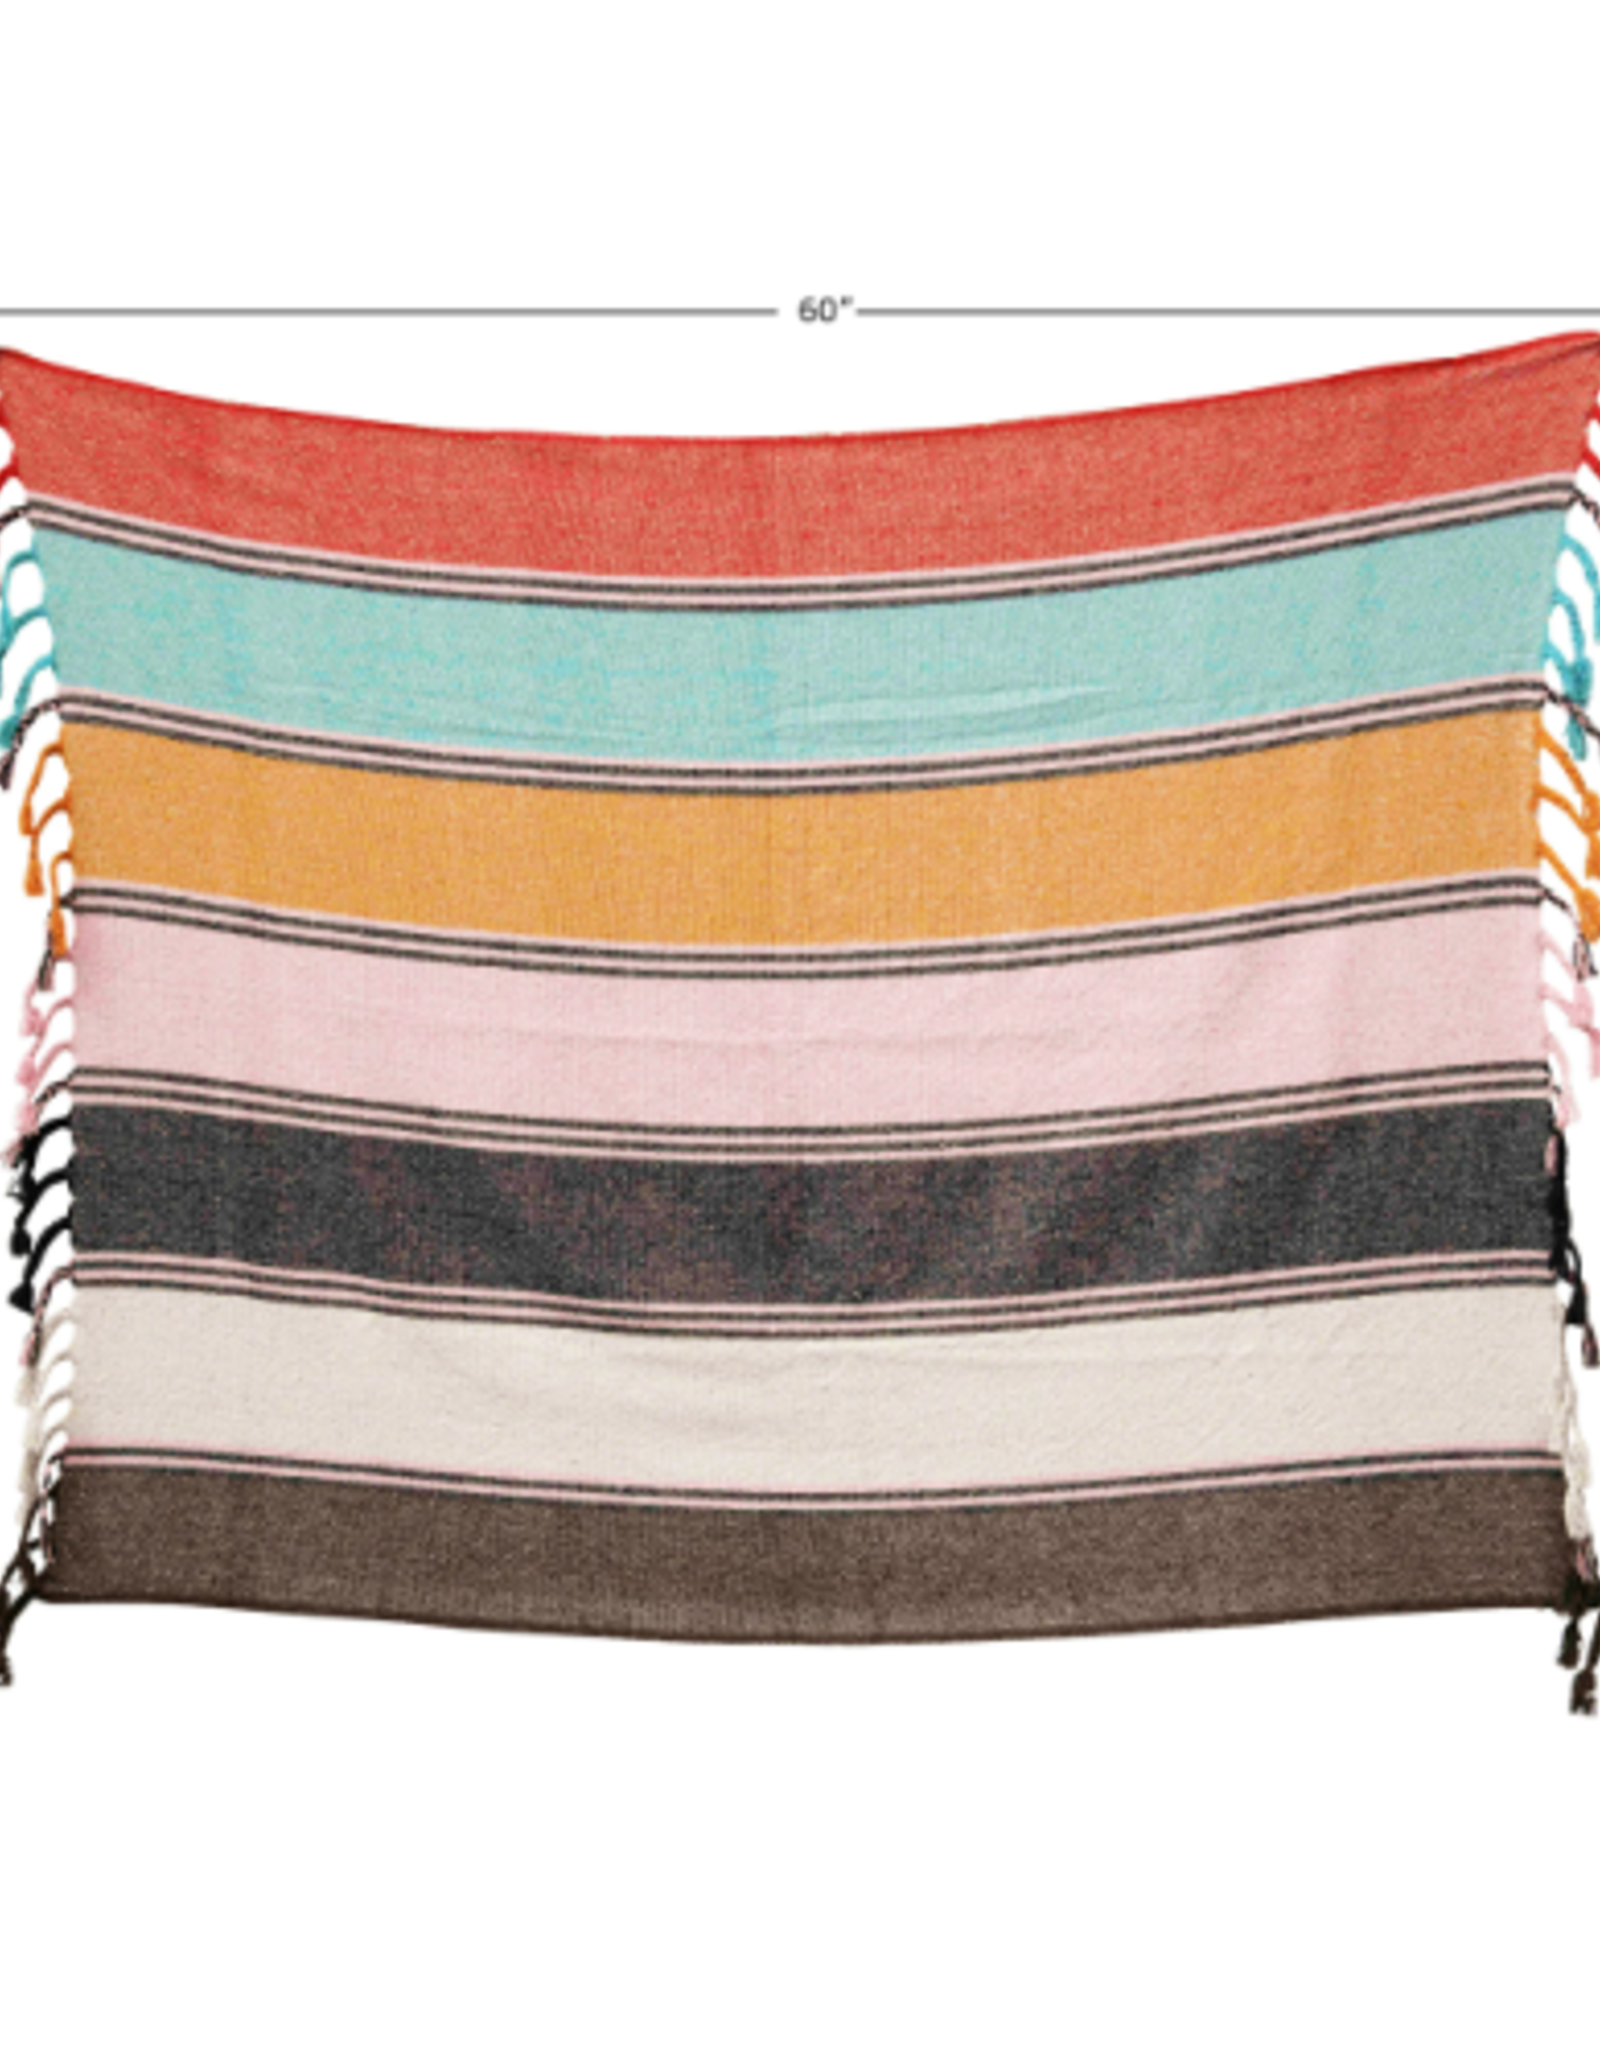 Creative Co-Op Throw Blanket - Recycled Cotton Blend Striped with Braided Fringe Multi 60"L x 50"W